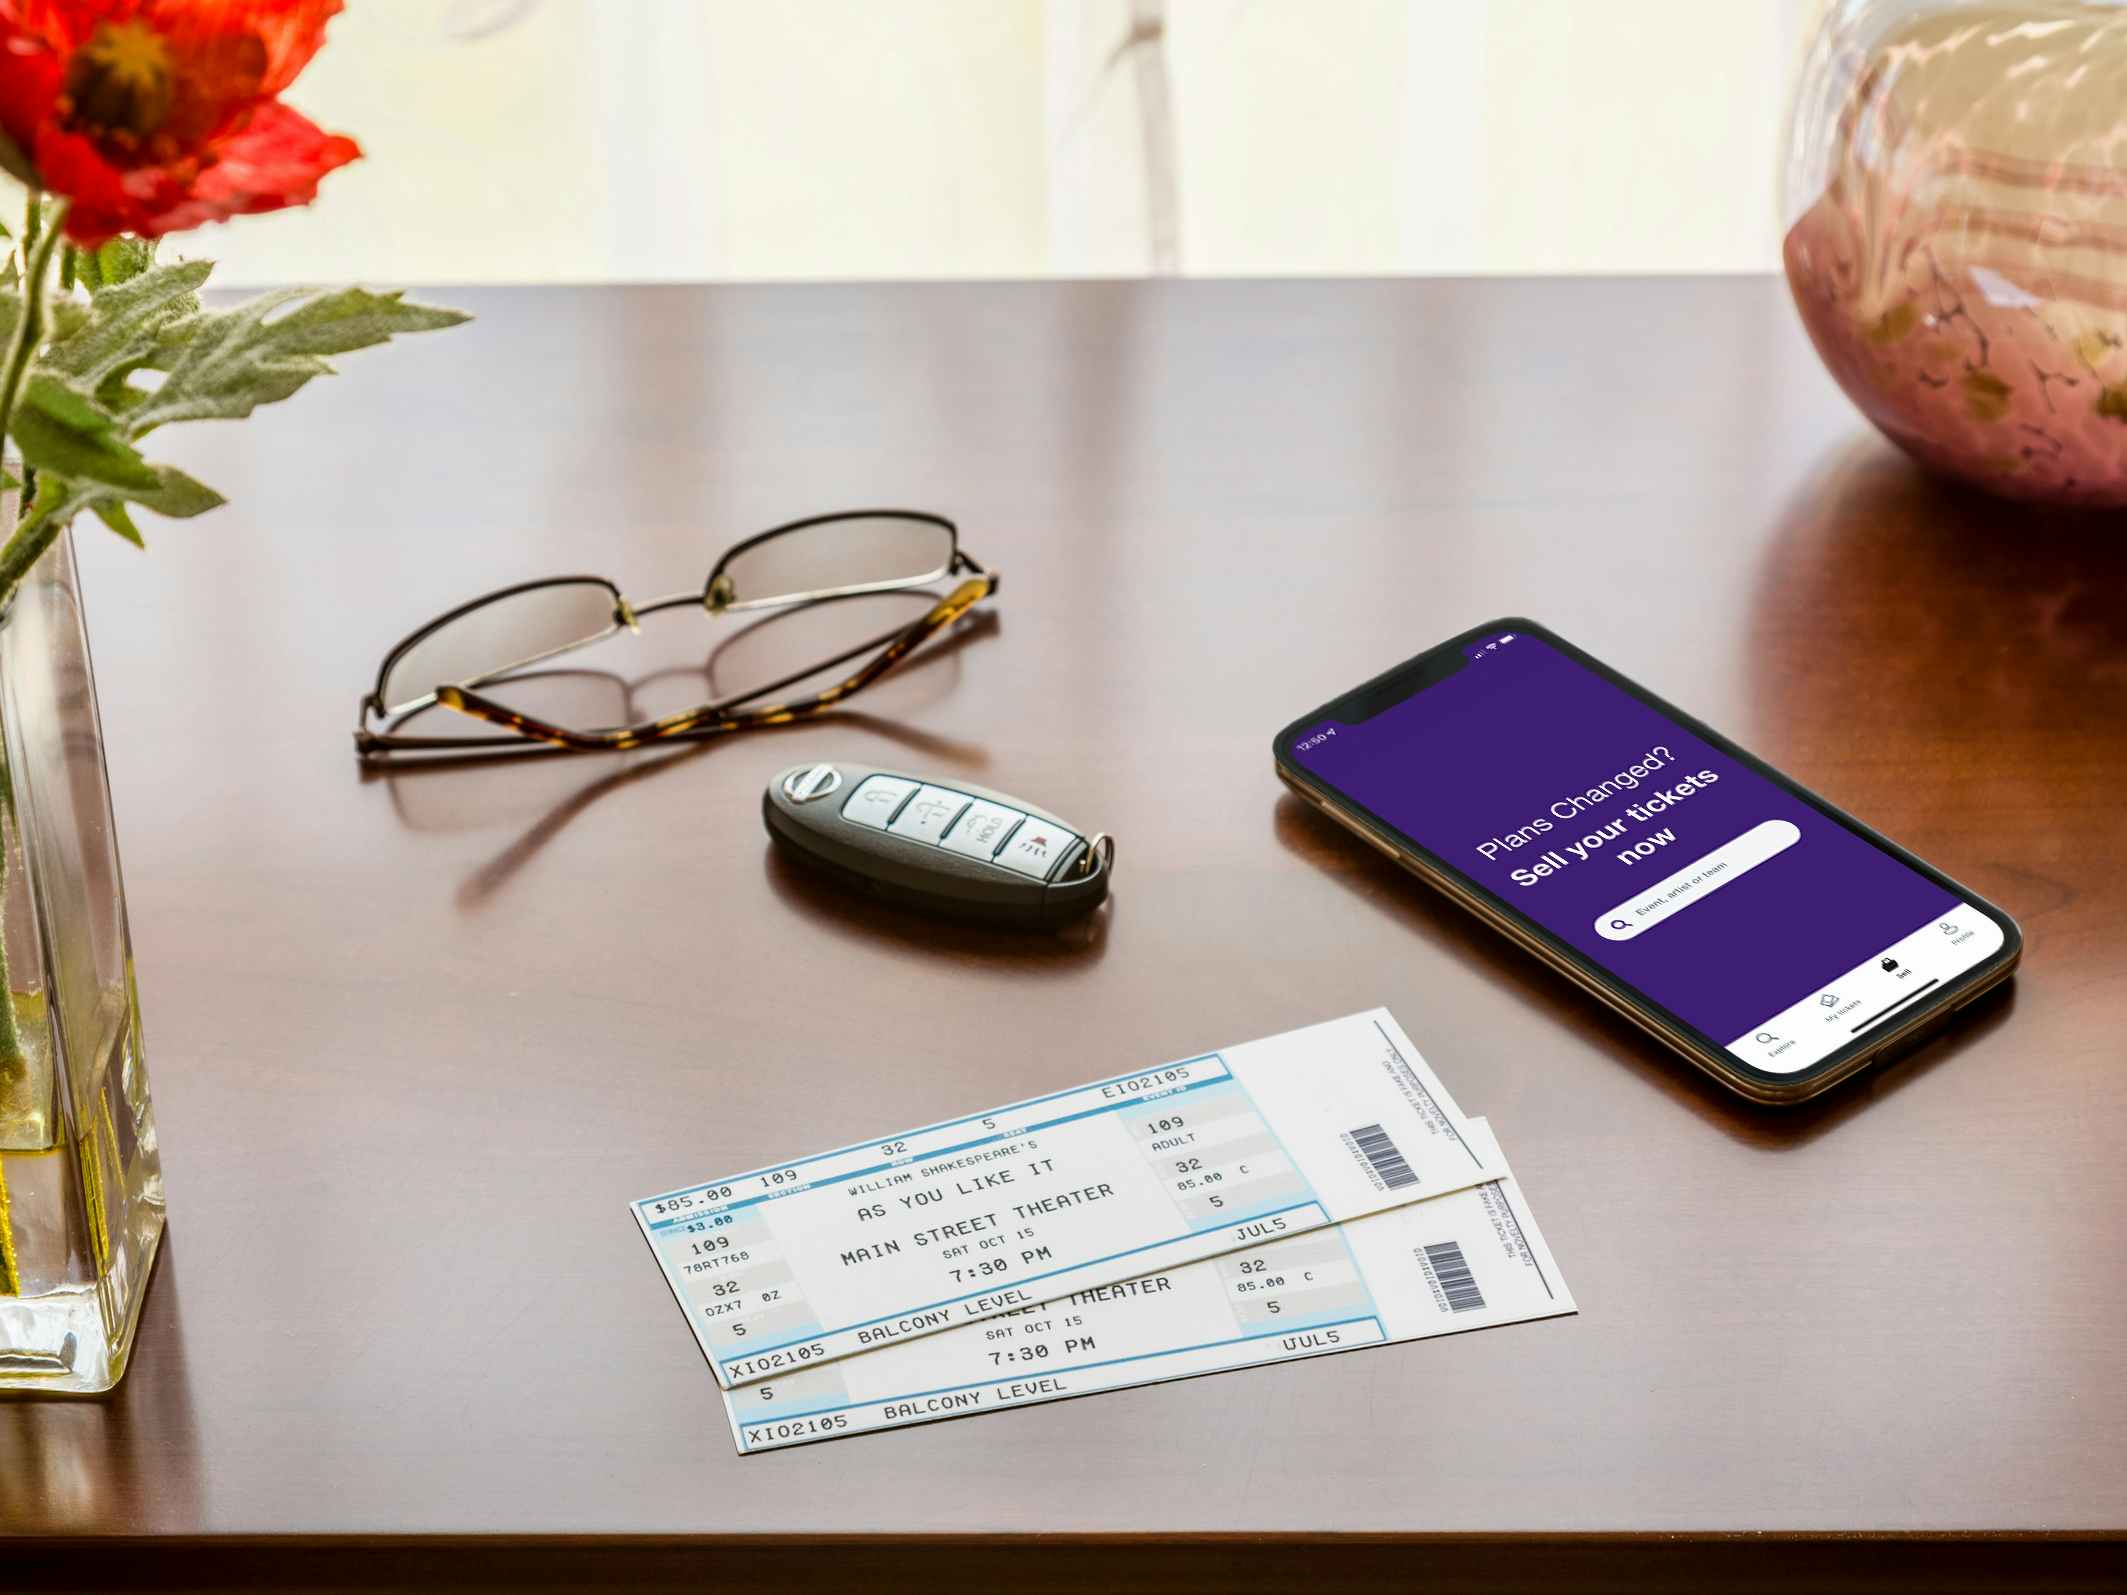 Some tickets on a table next to a phone displaying the StubHub selling page in their mobile app